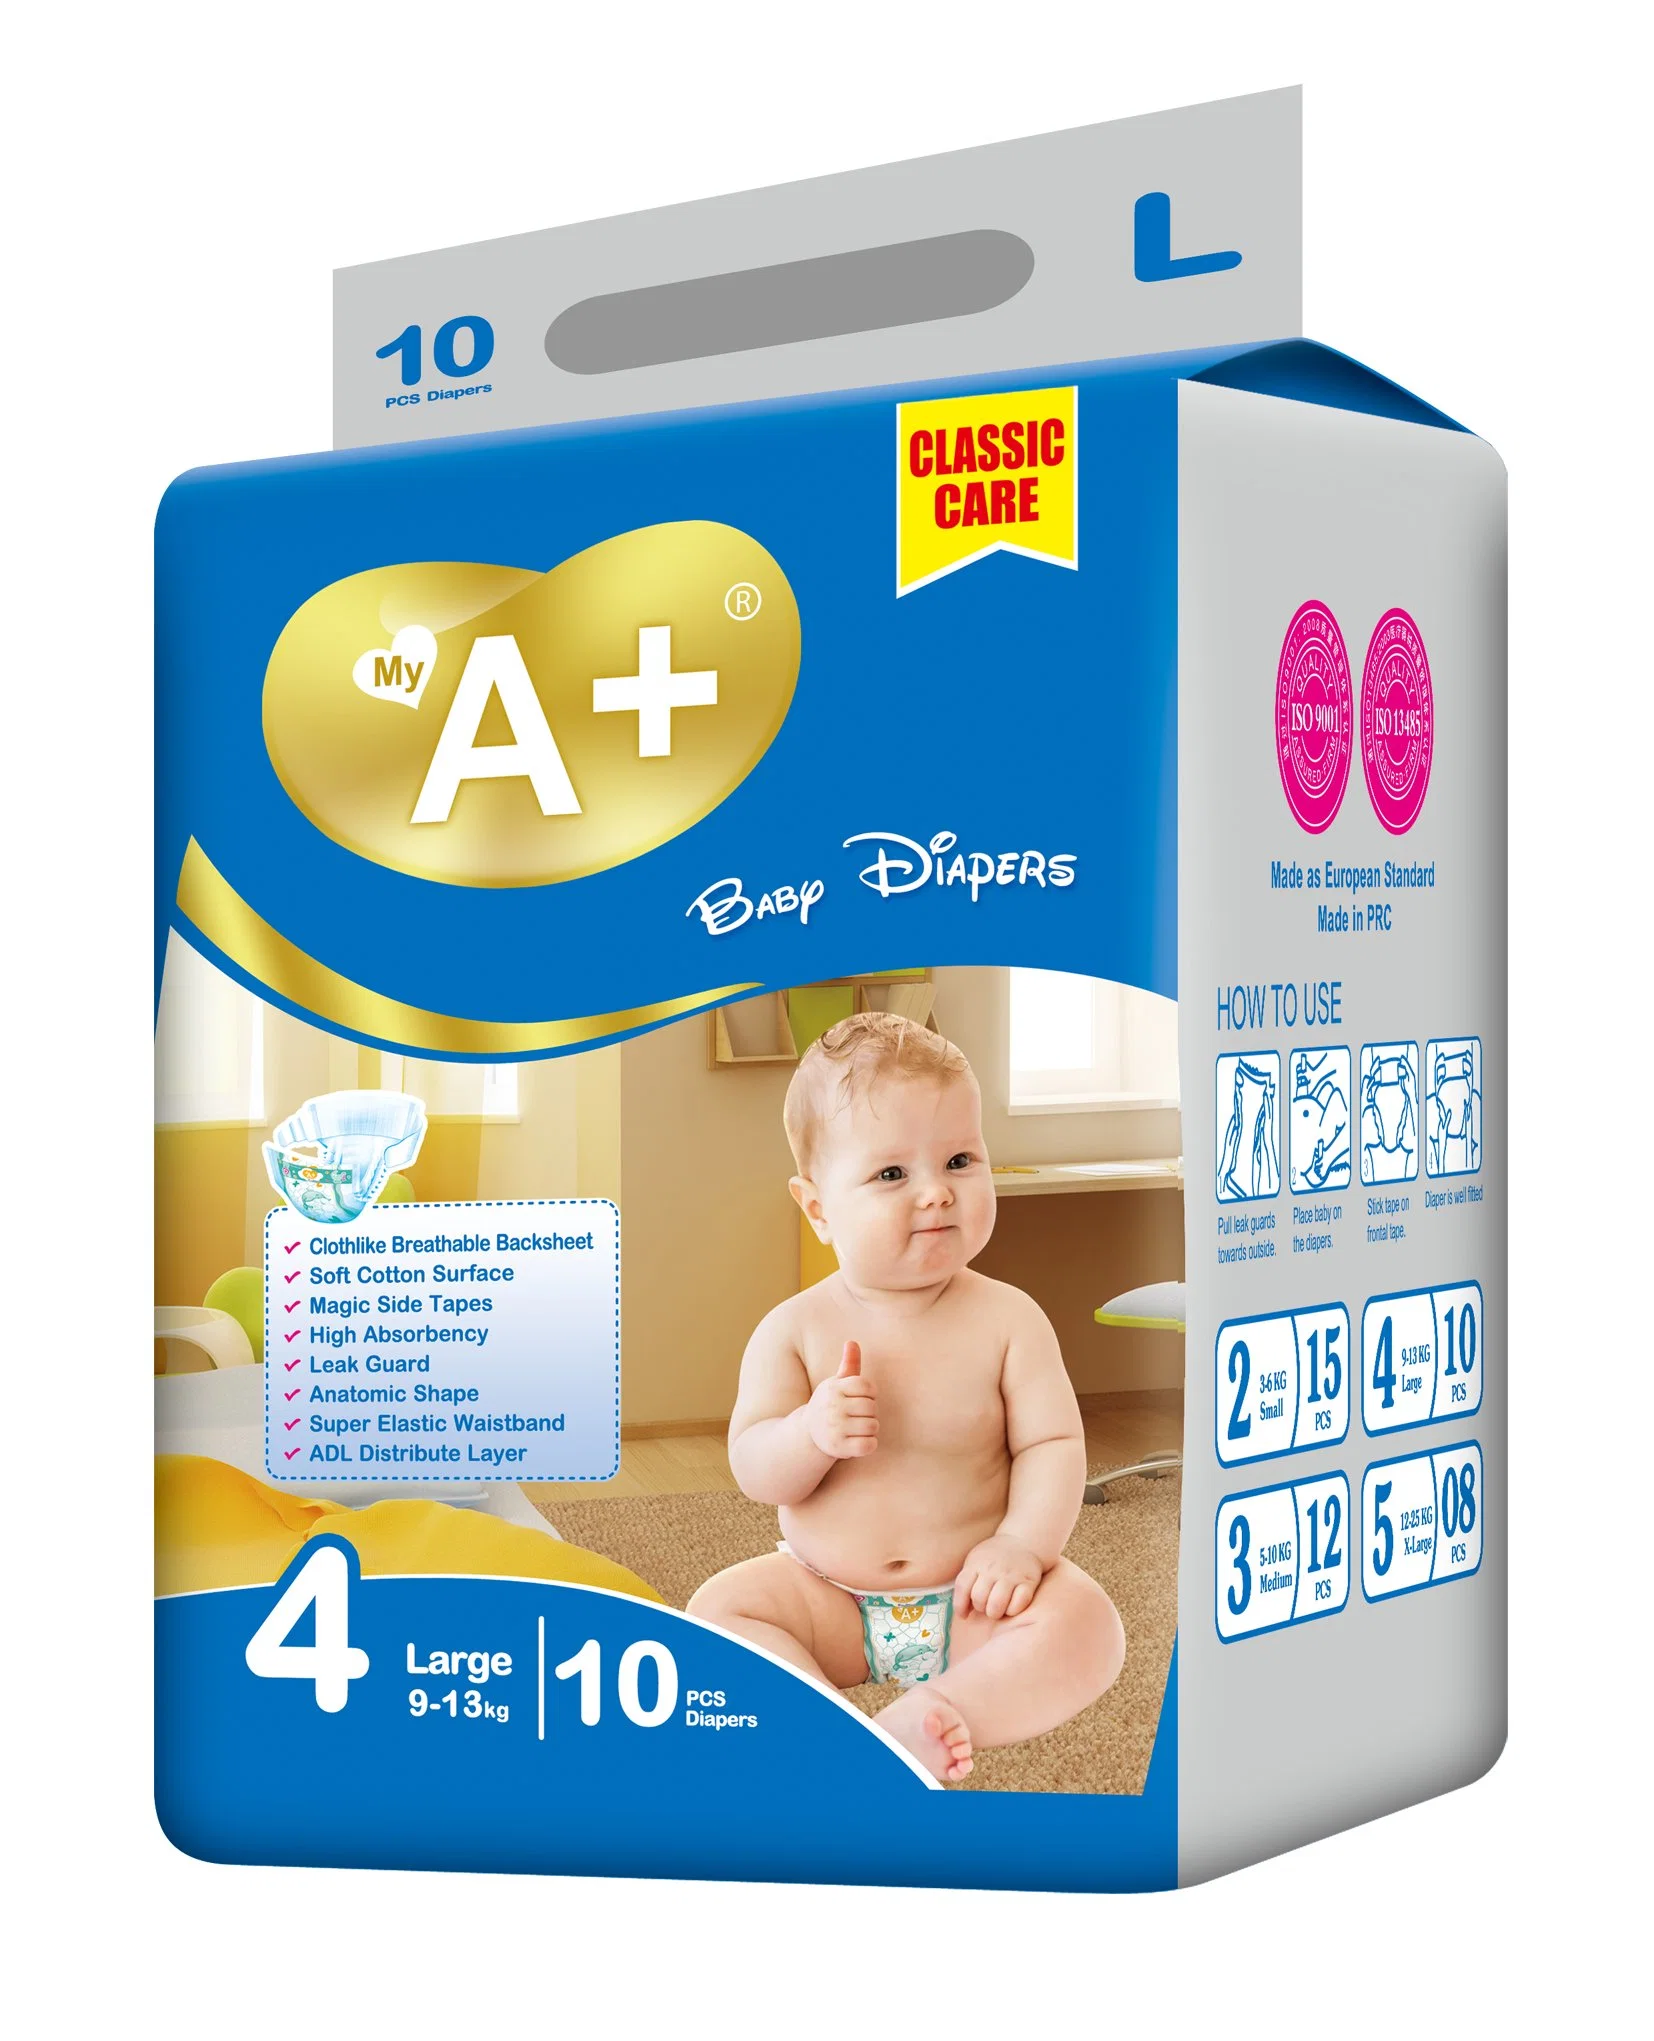 Super Soft Disposable Wholesale Baby Diaper Product Russia Japan